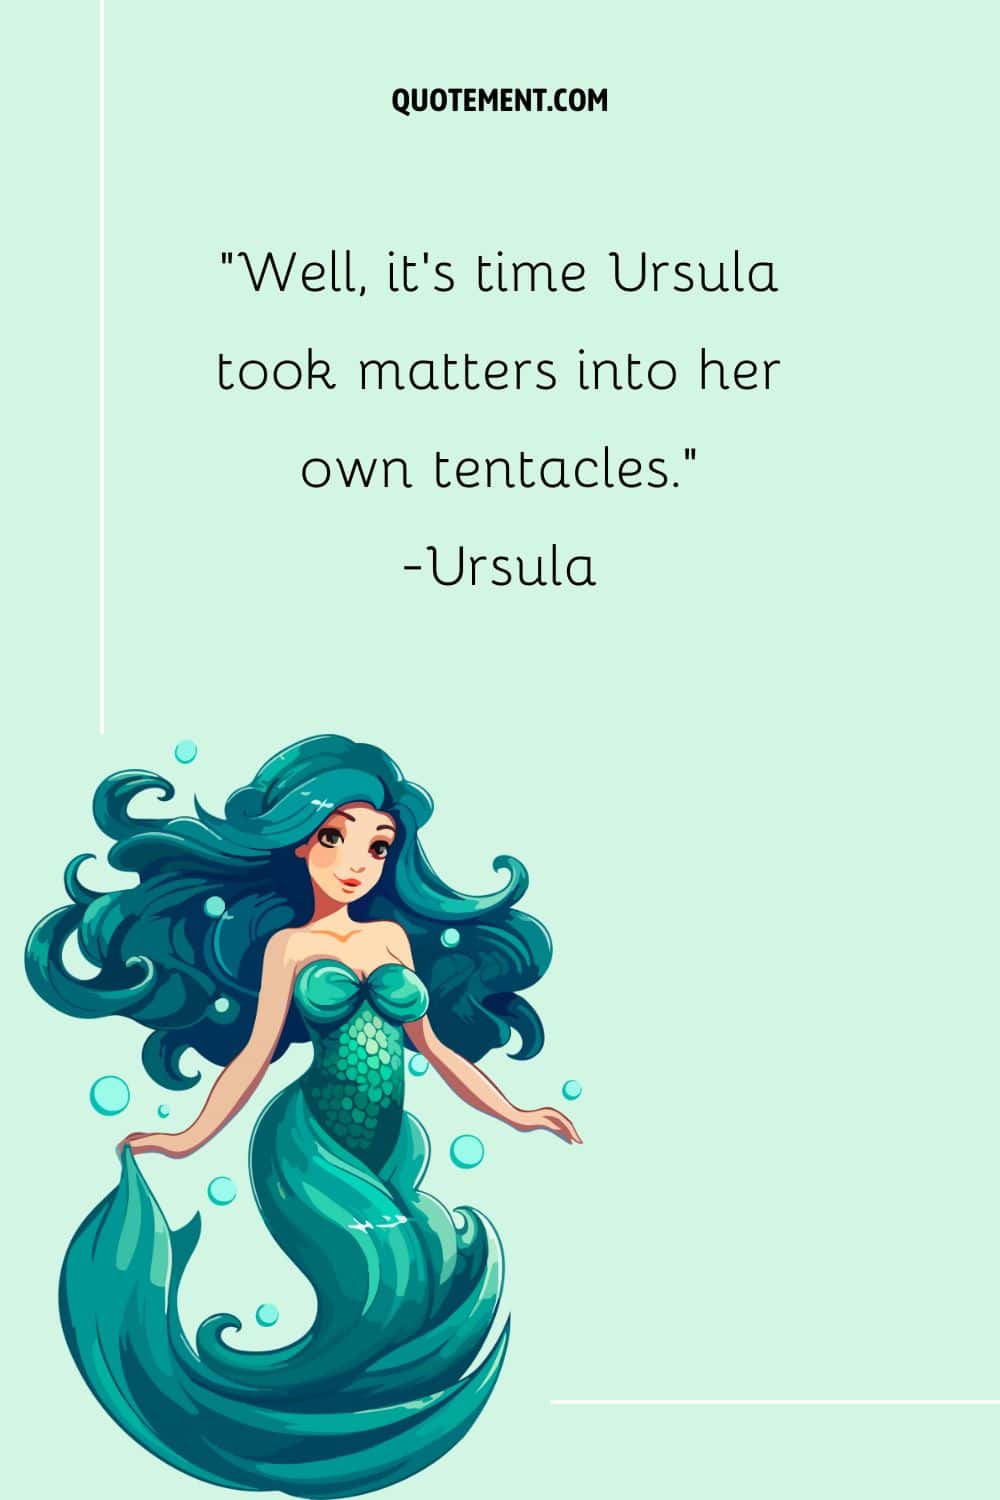 Illustration of a blue-haired mermaid representing Ursula quote.